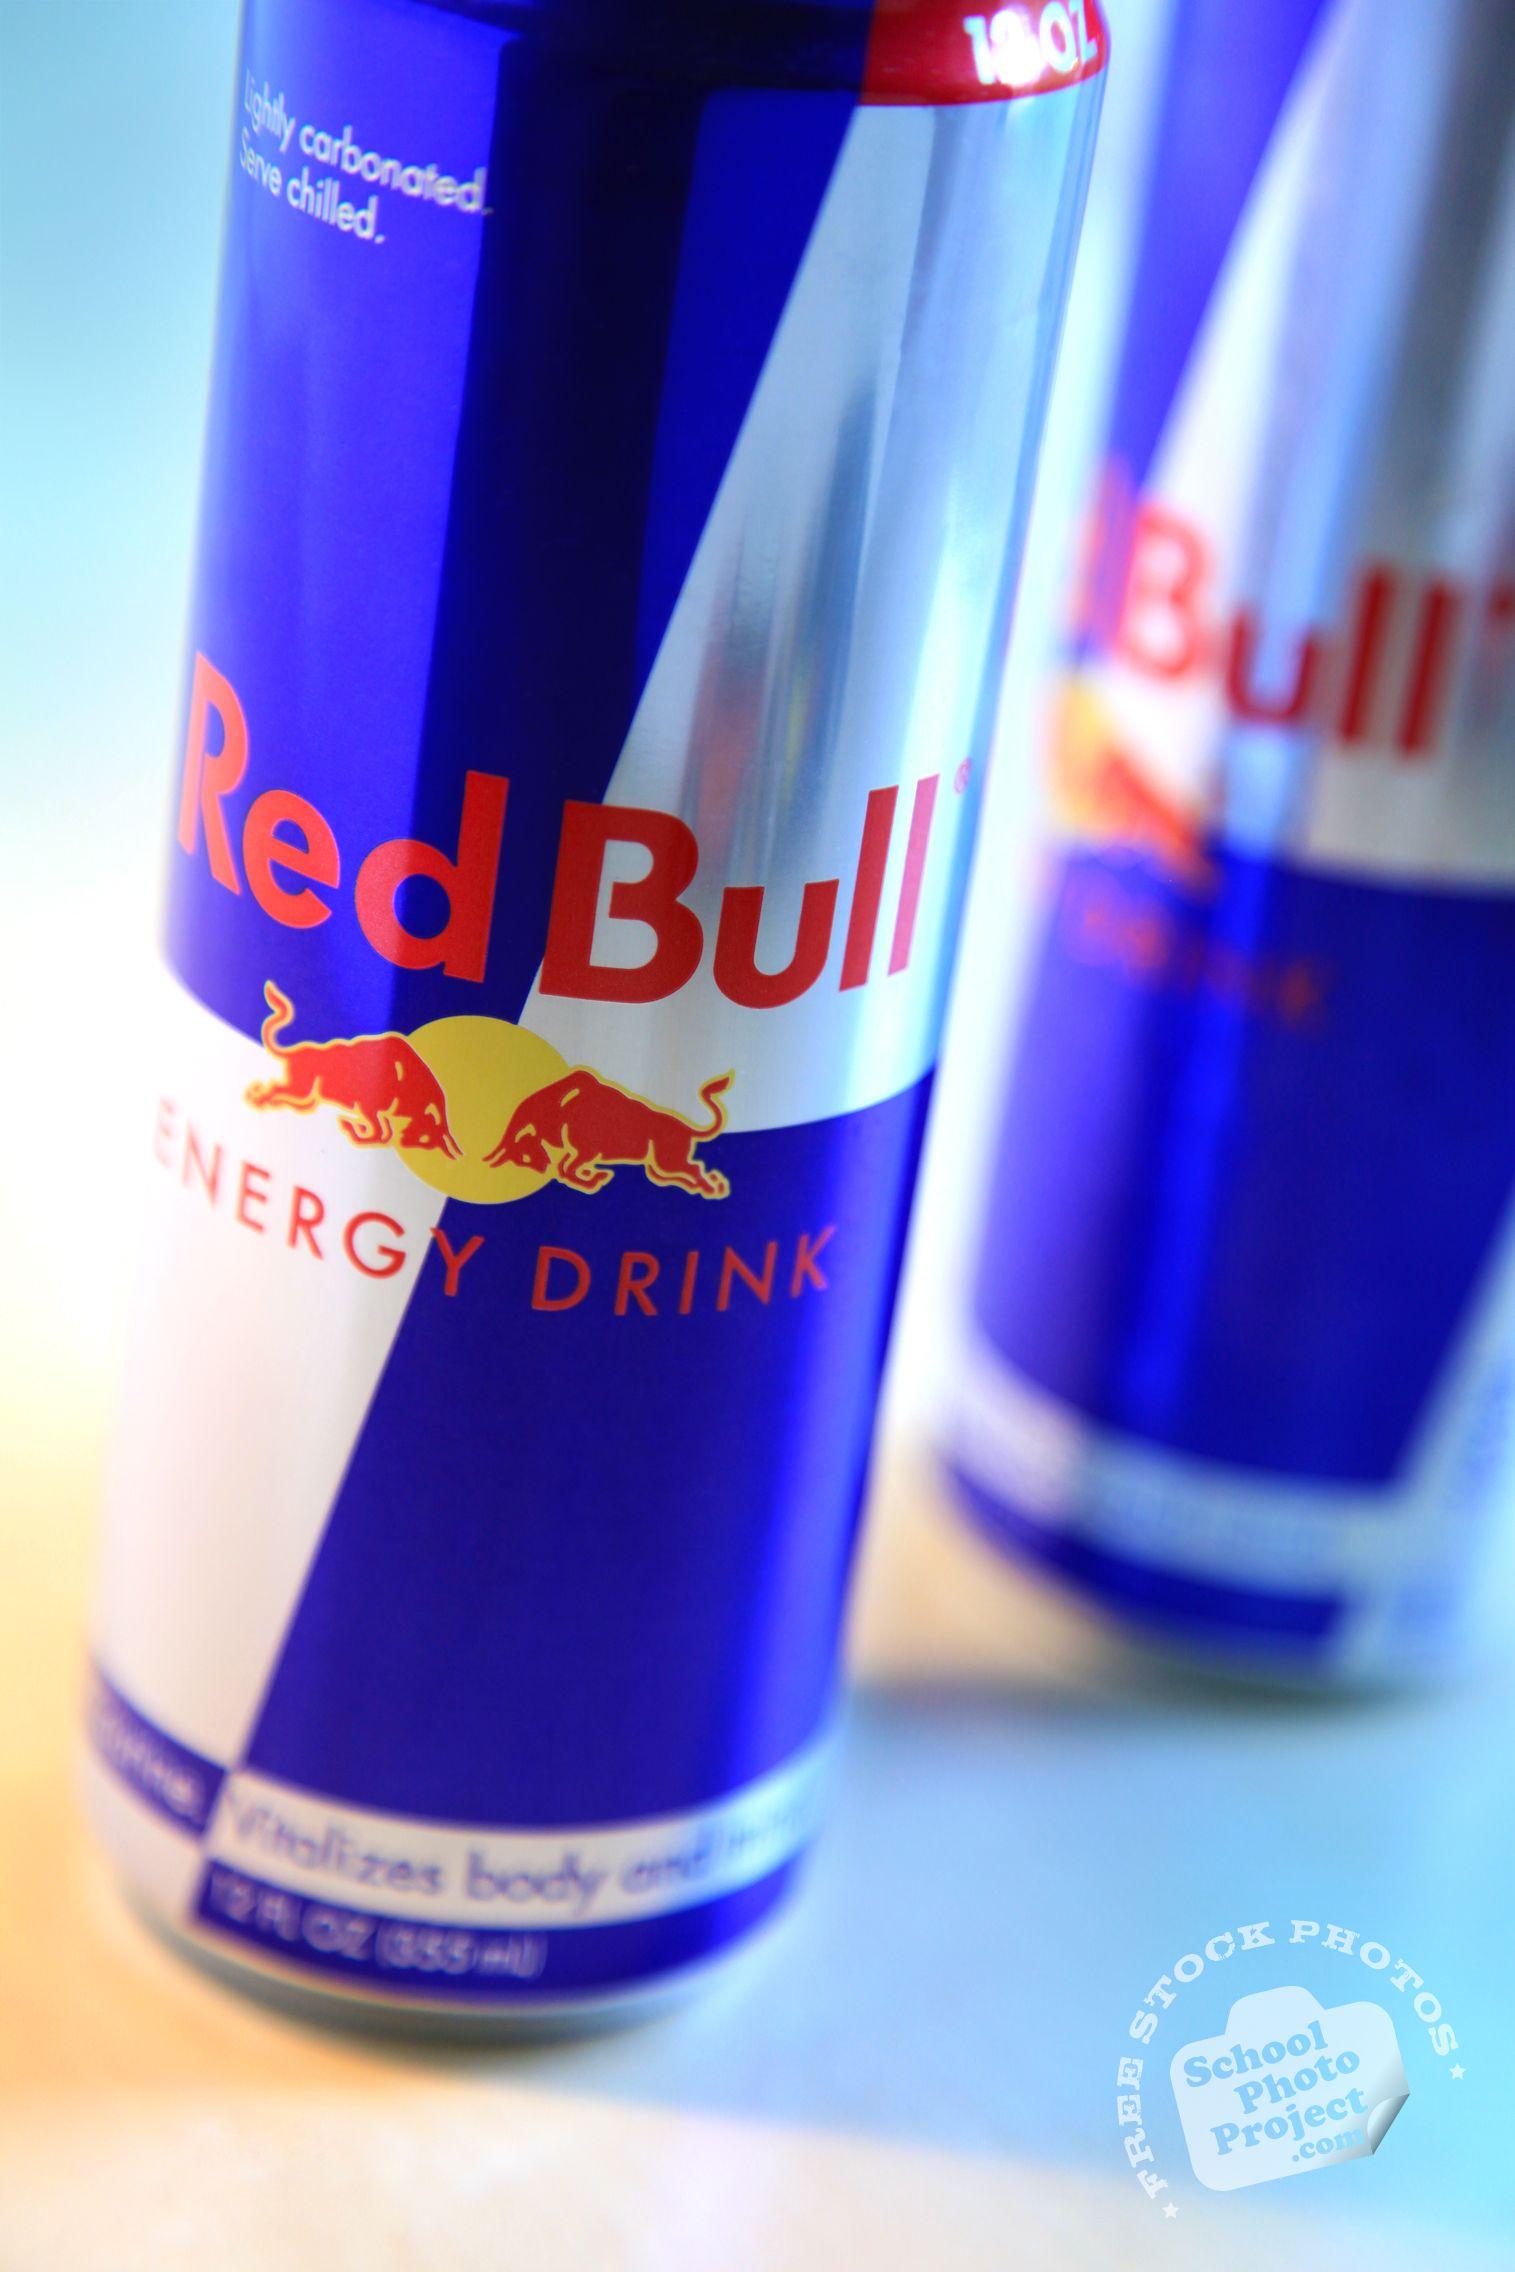 Red Bull Can Logo - Red Bull Logo, FREE Stock Photo, Image, Picture: Red Bull's Cans ...